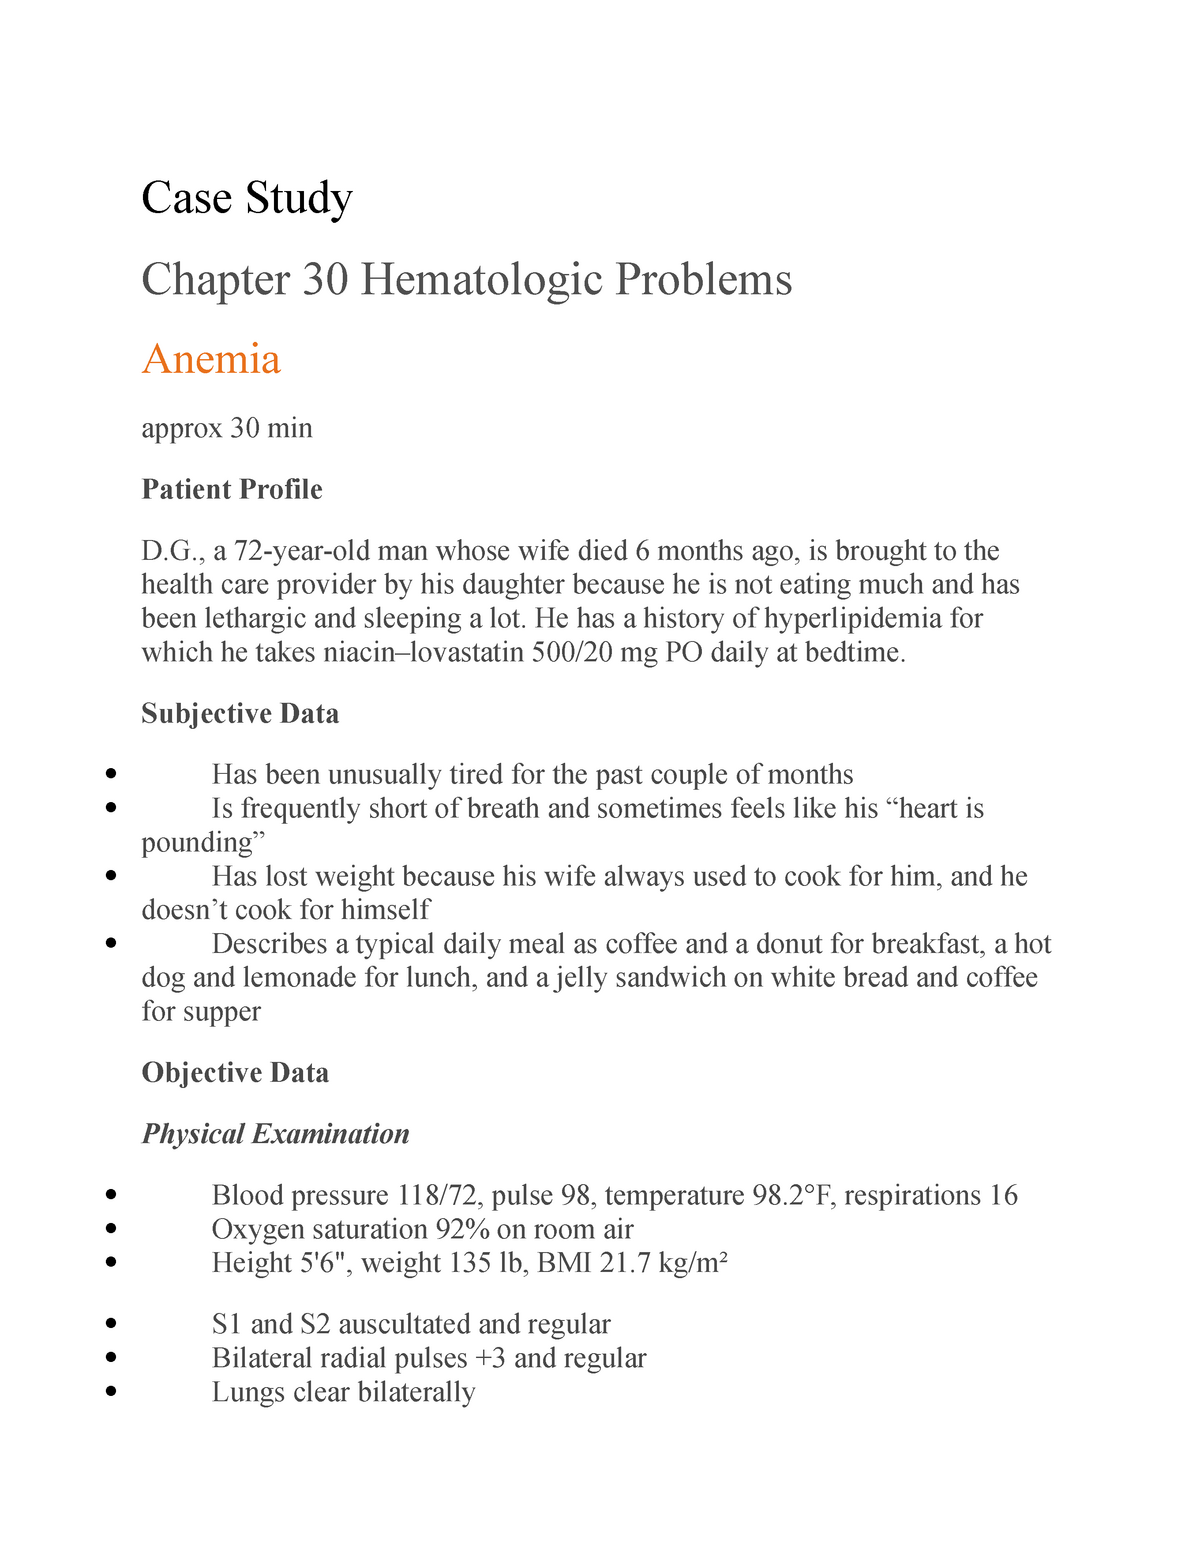 case study in anemia